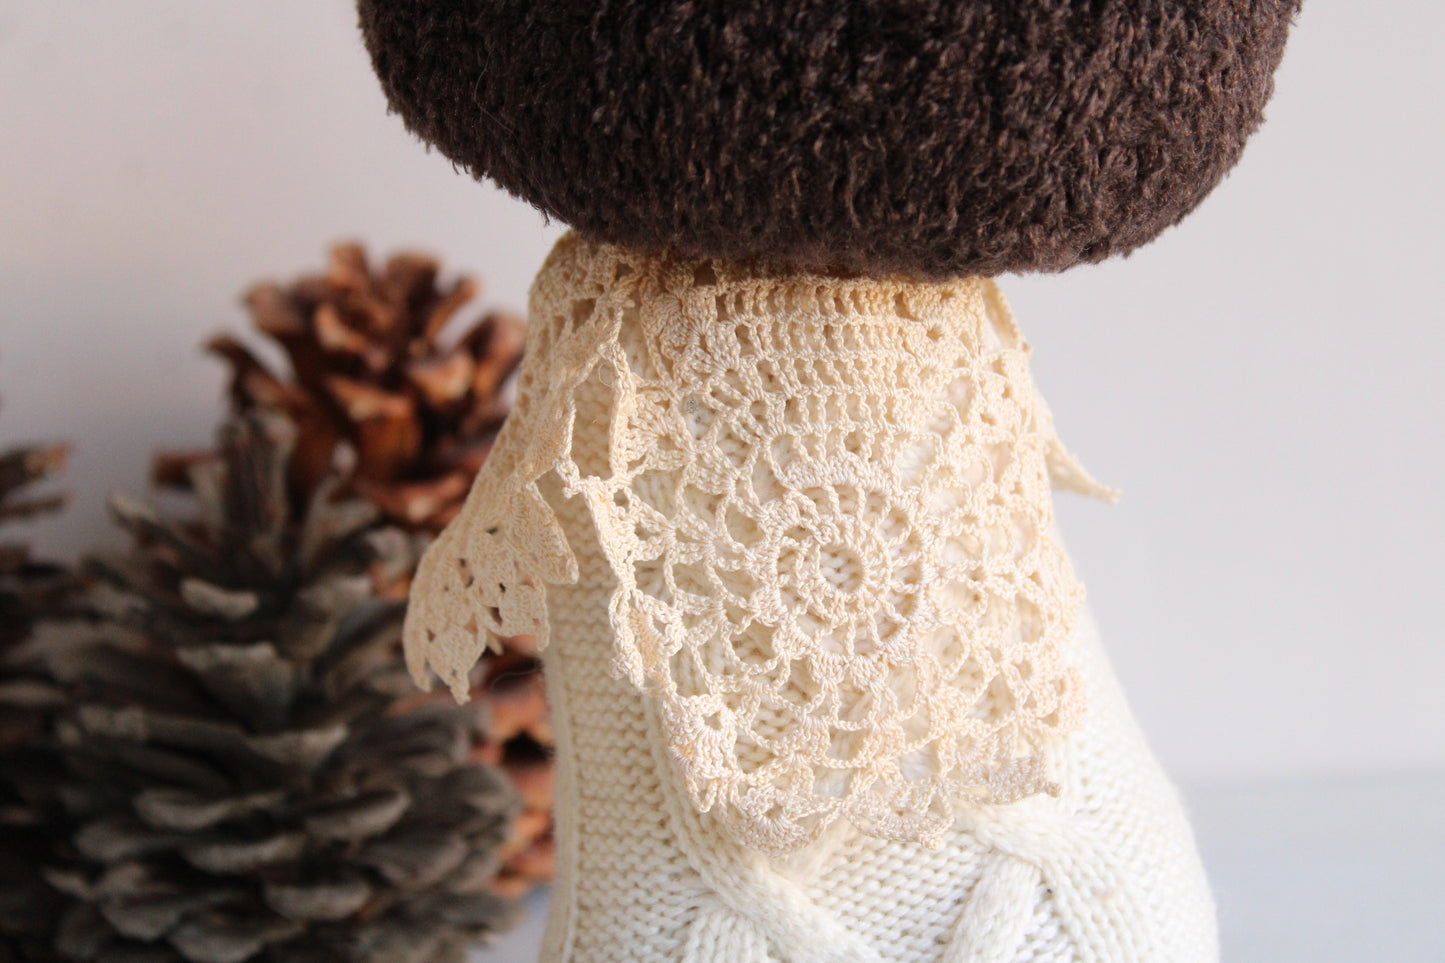 "Victorian Woods" Handcrafted Sweater Toadstool with Vintage Lace